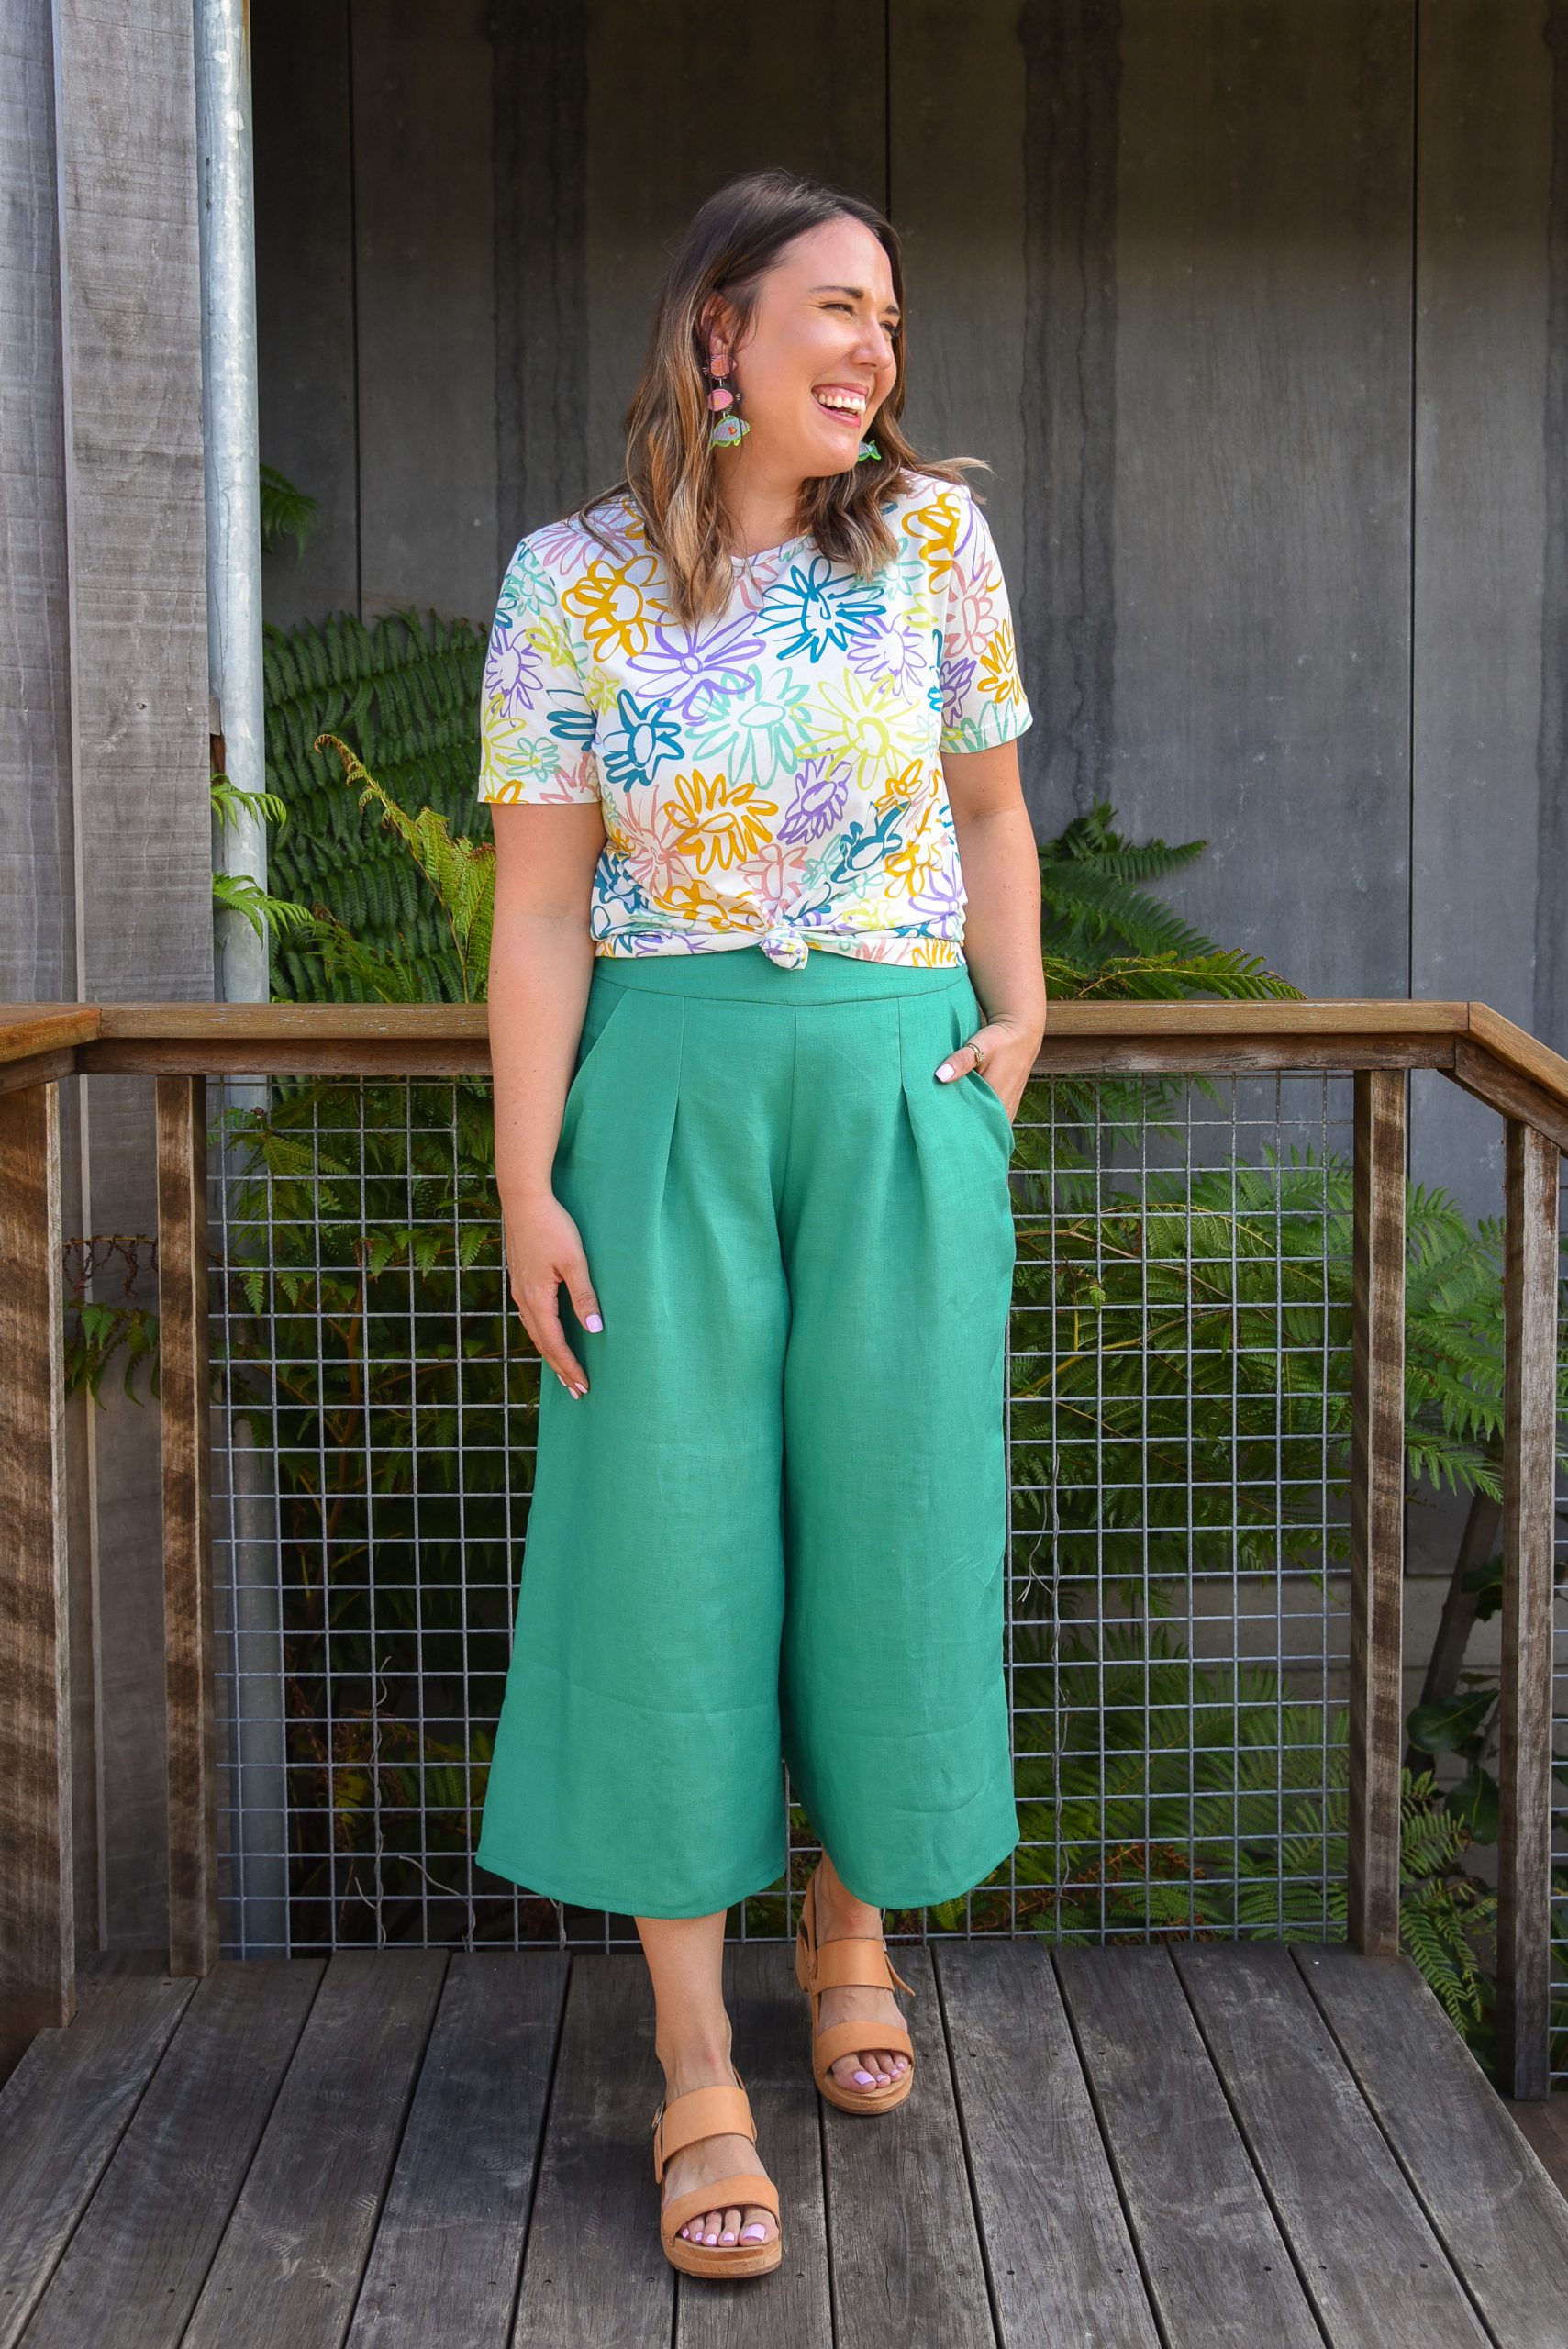 Culottes | Square pants outfit casual, Minimalist style clothing, Casual  outfits